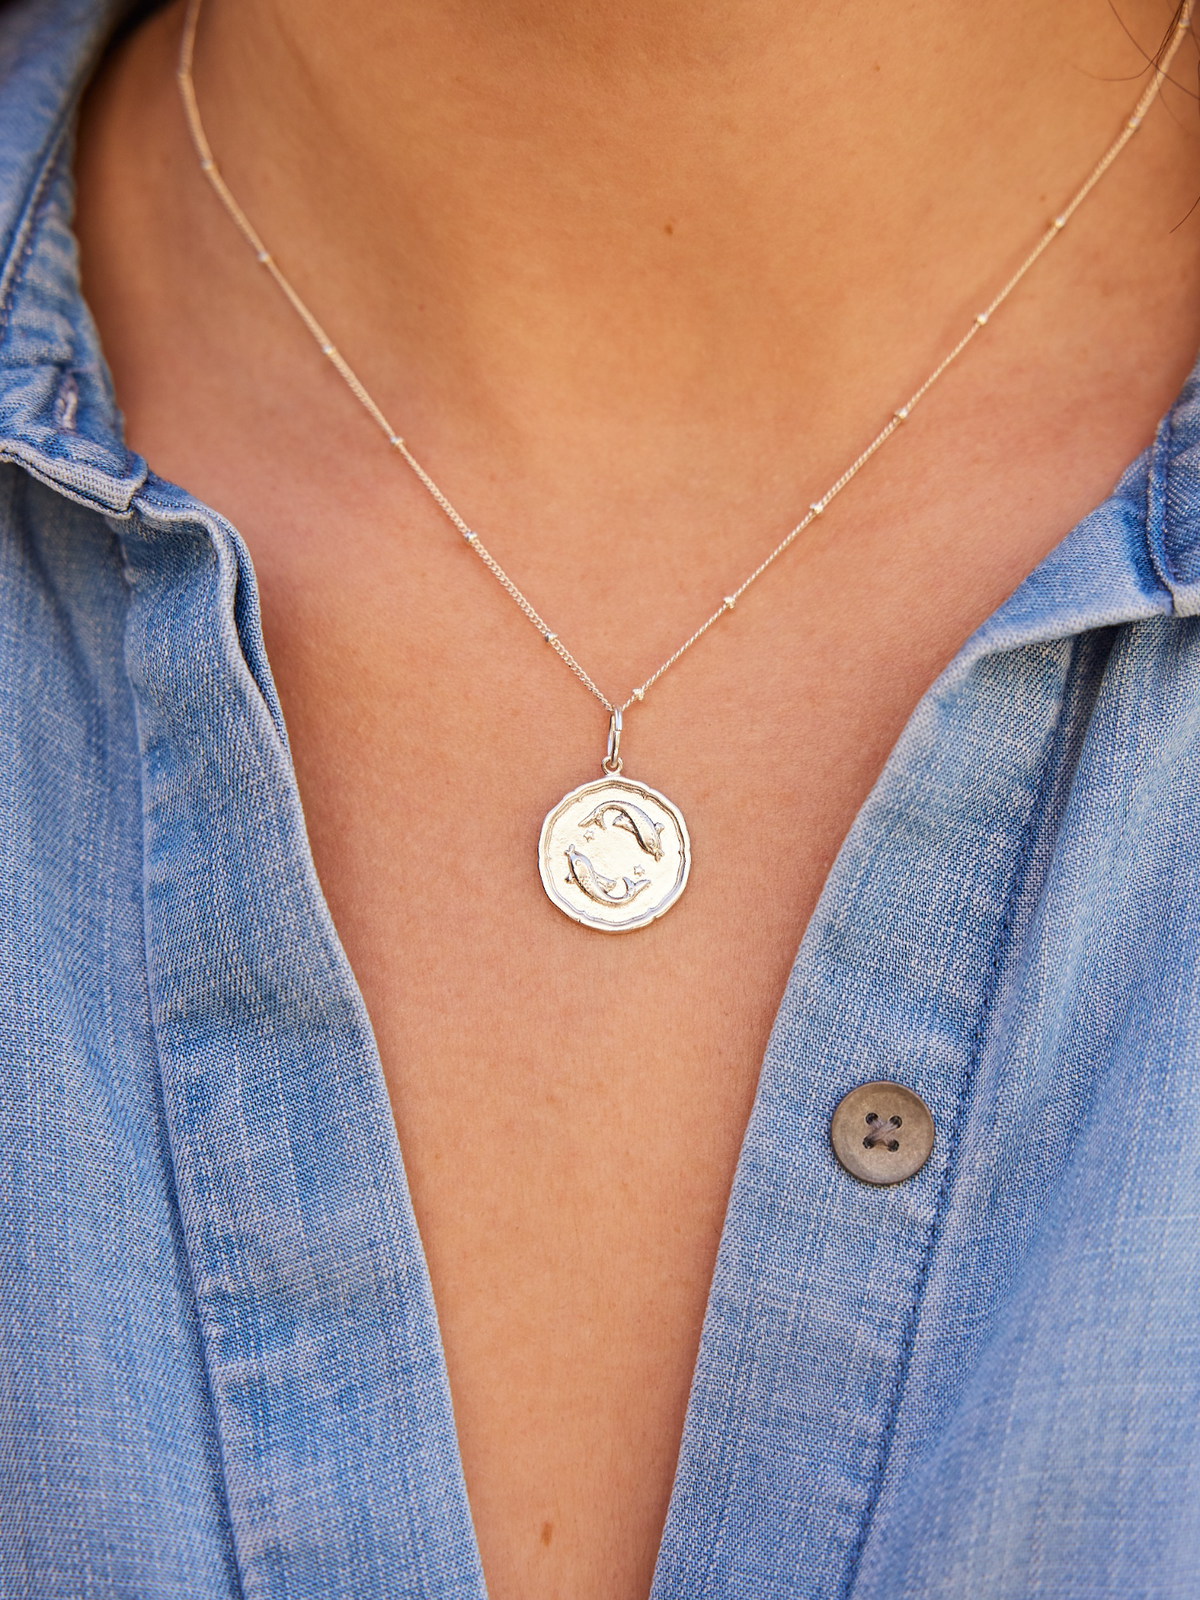 Silver Libra Necklace - A Simple and Elegant Way to Show Your Zodiac Sign